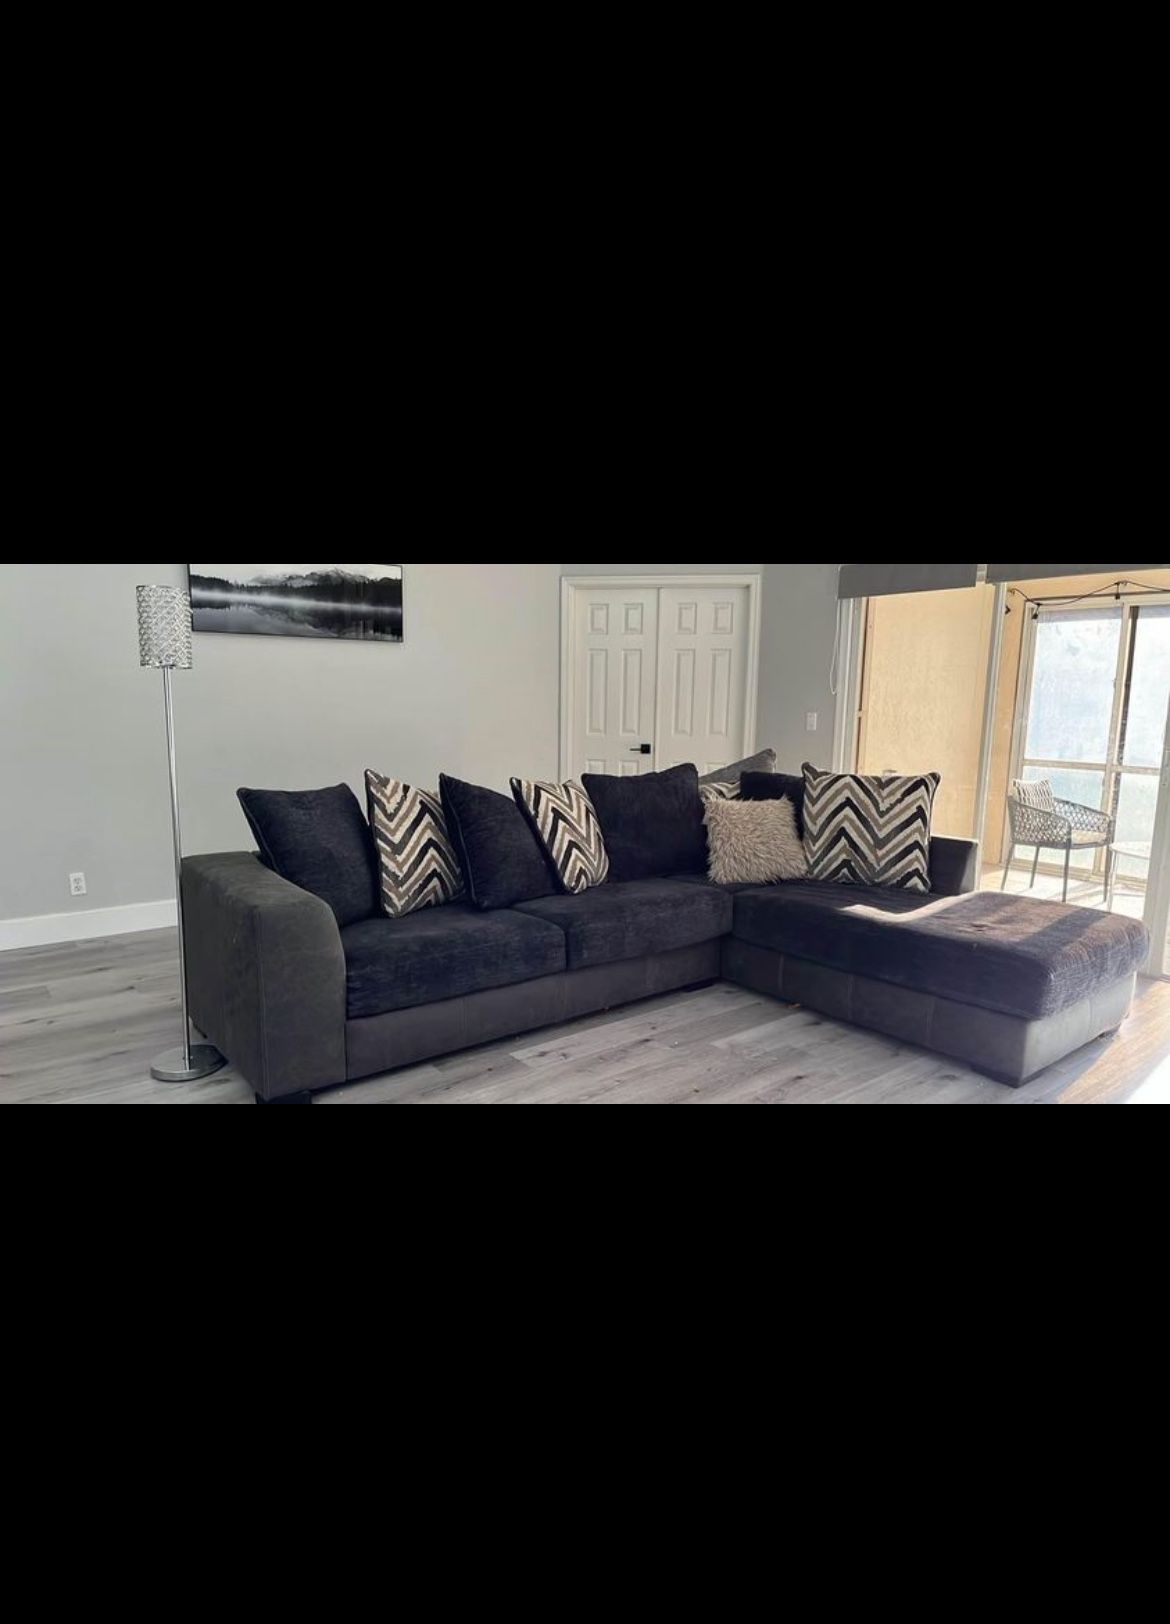 10 X 8 Black Sectional couch with a bunch of pillows